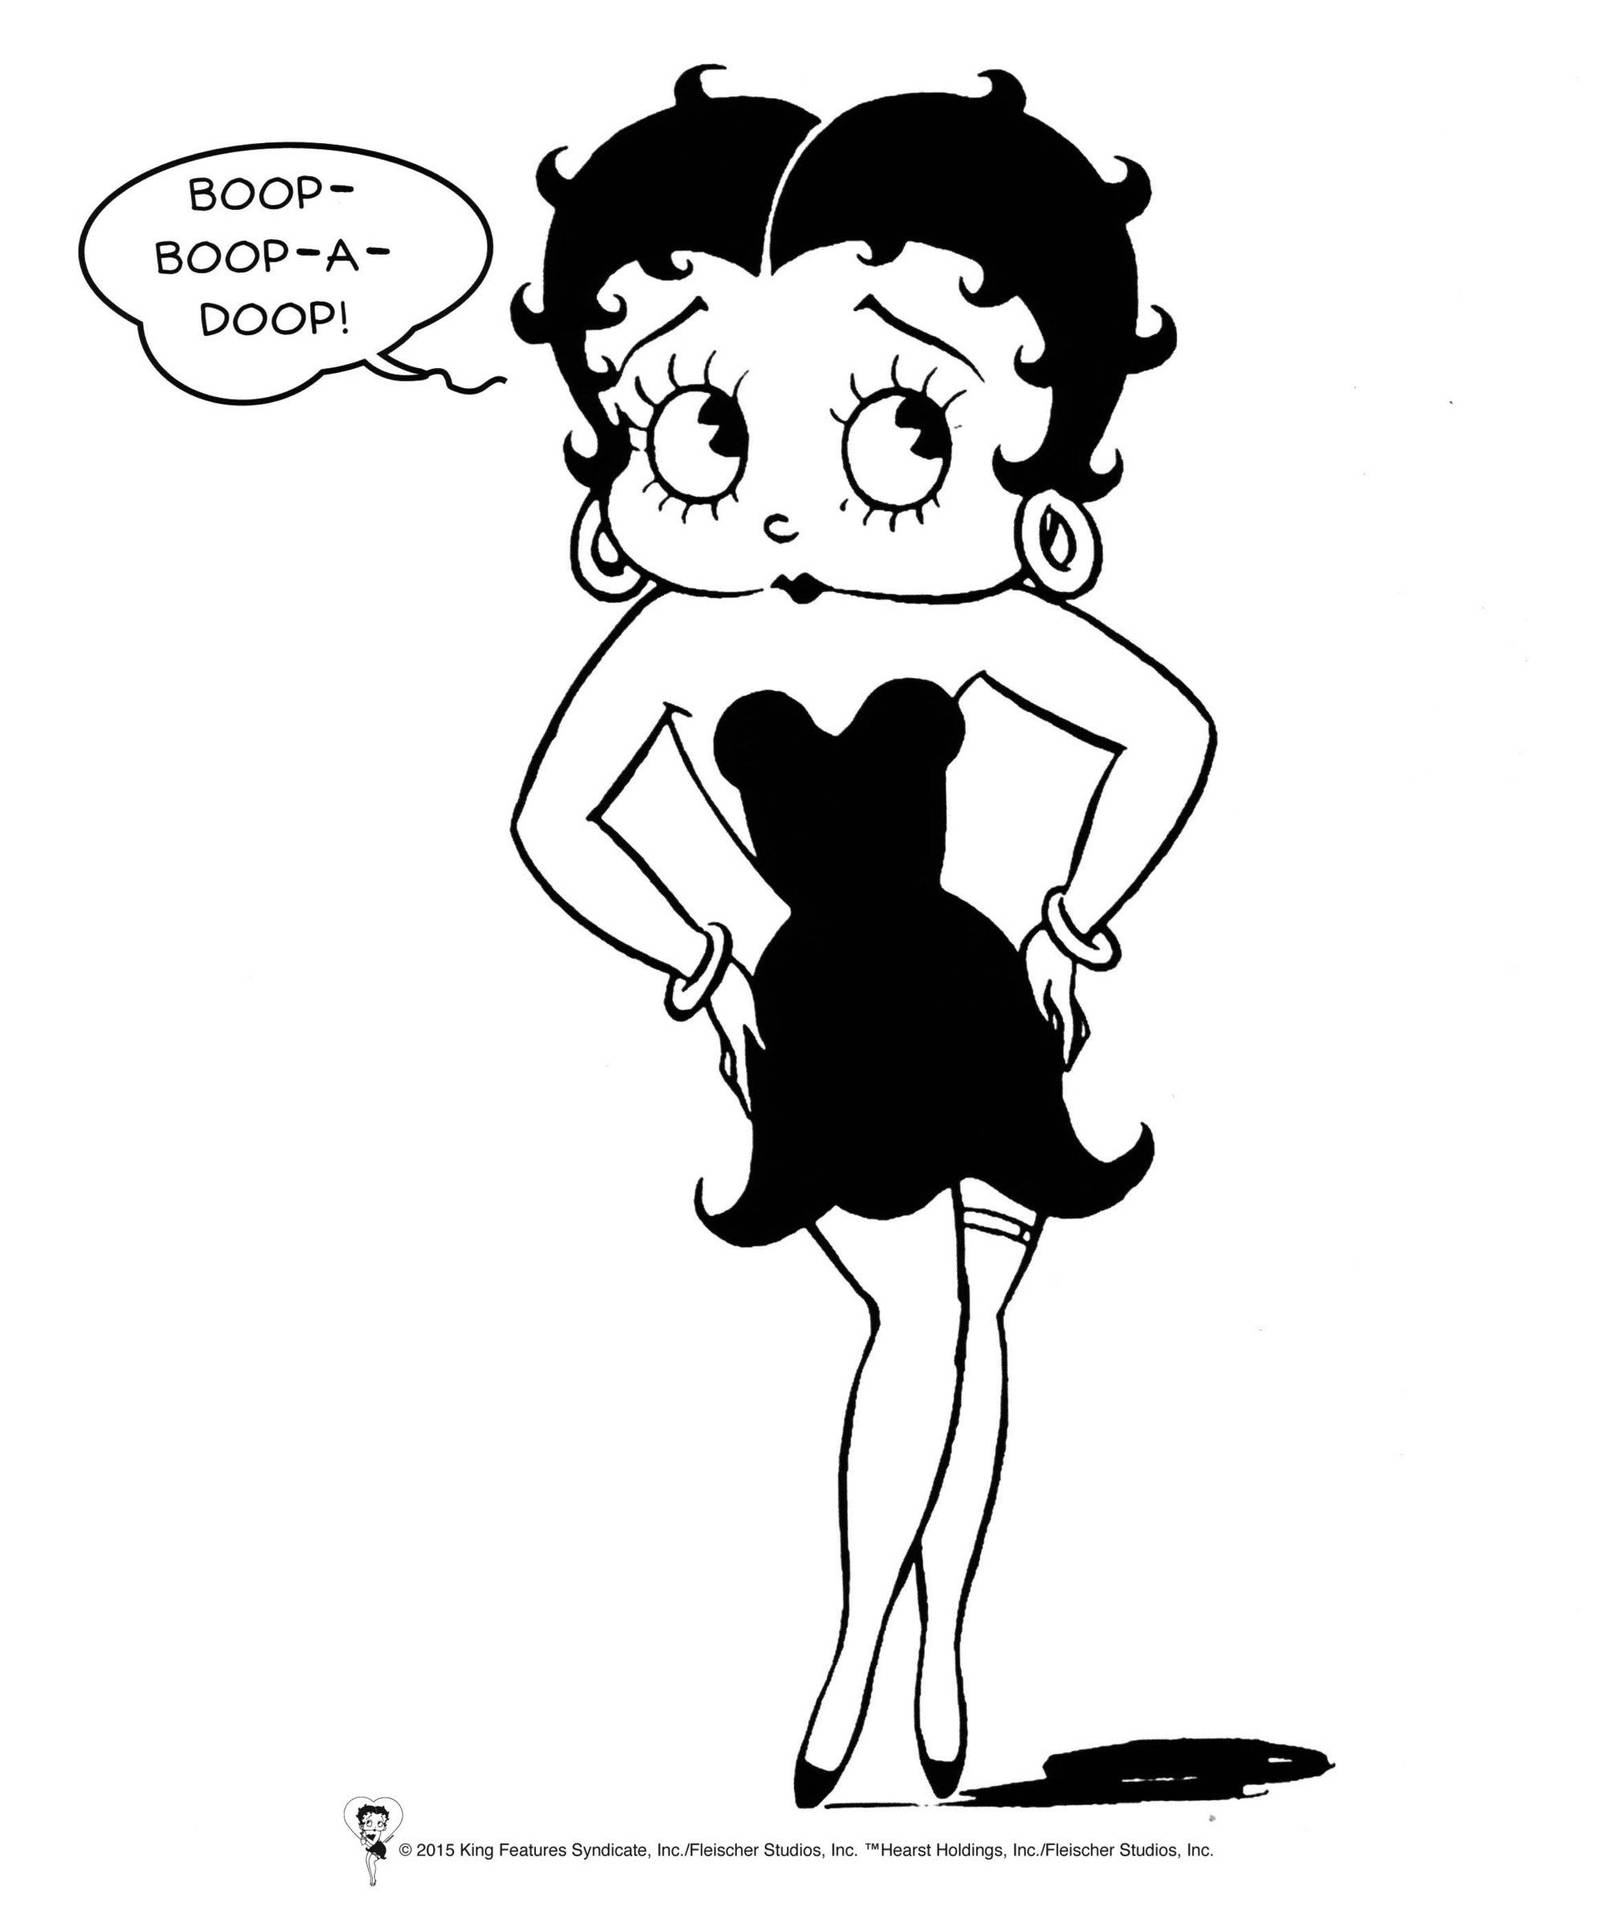 Free Betty Boop Wallpaper Downloads, [100+] Betty Boop Wallpapers for FREE  